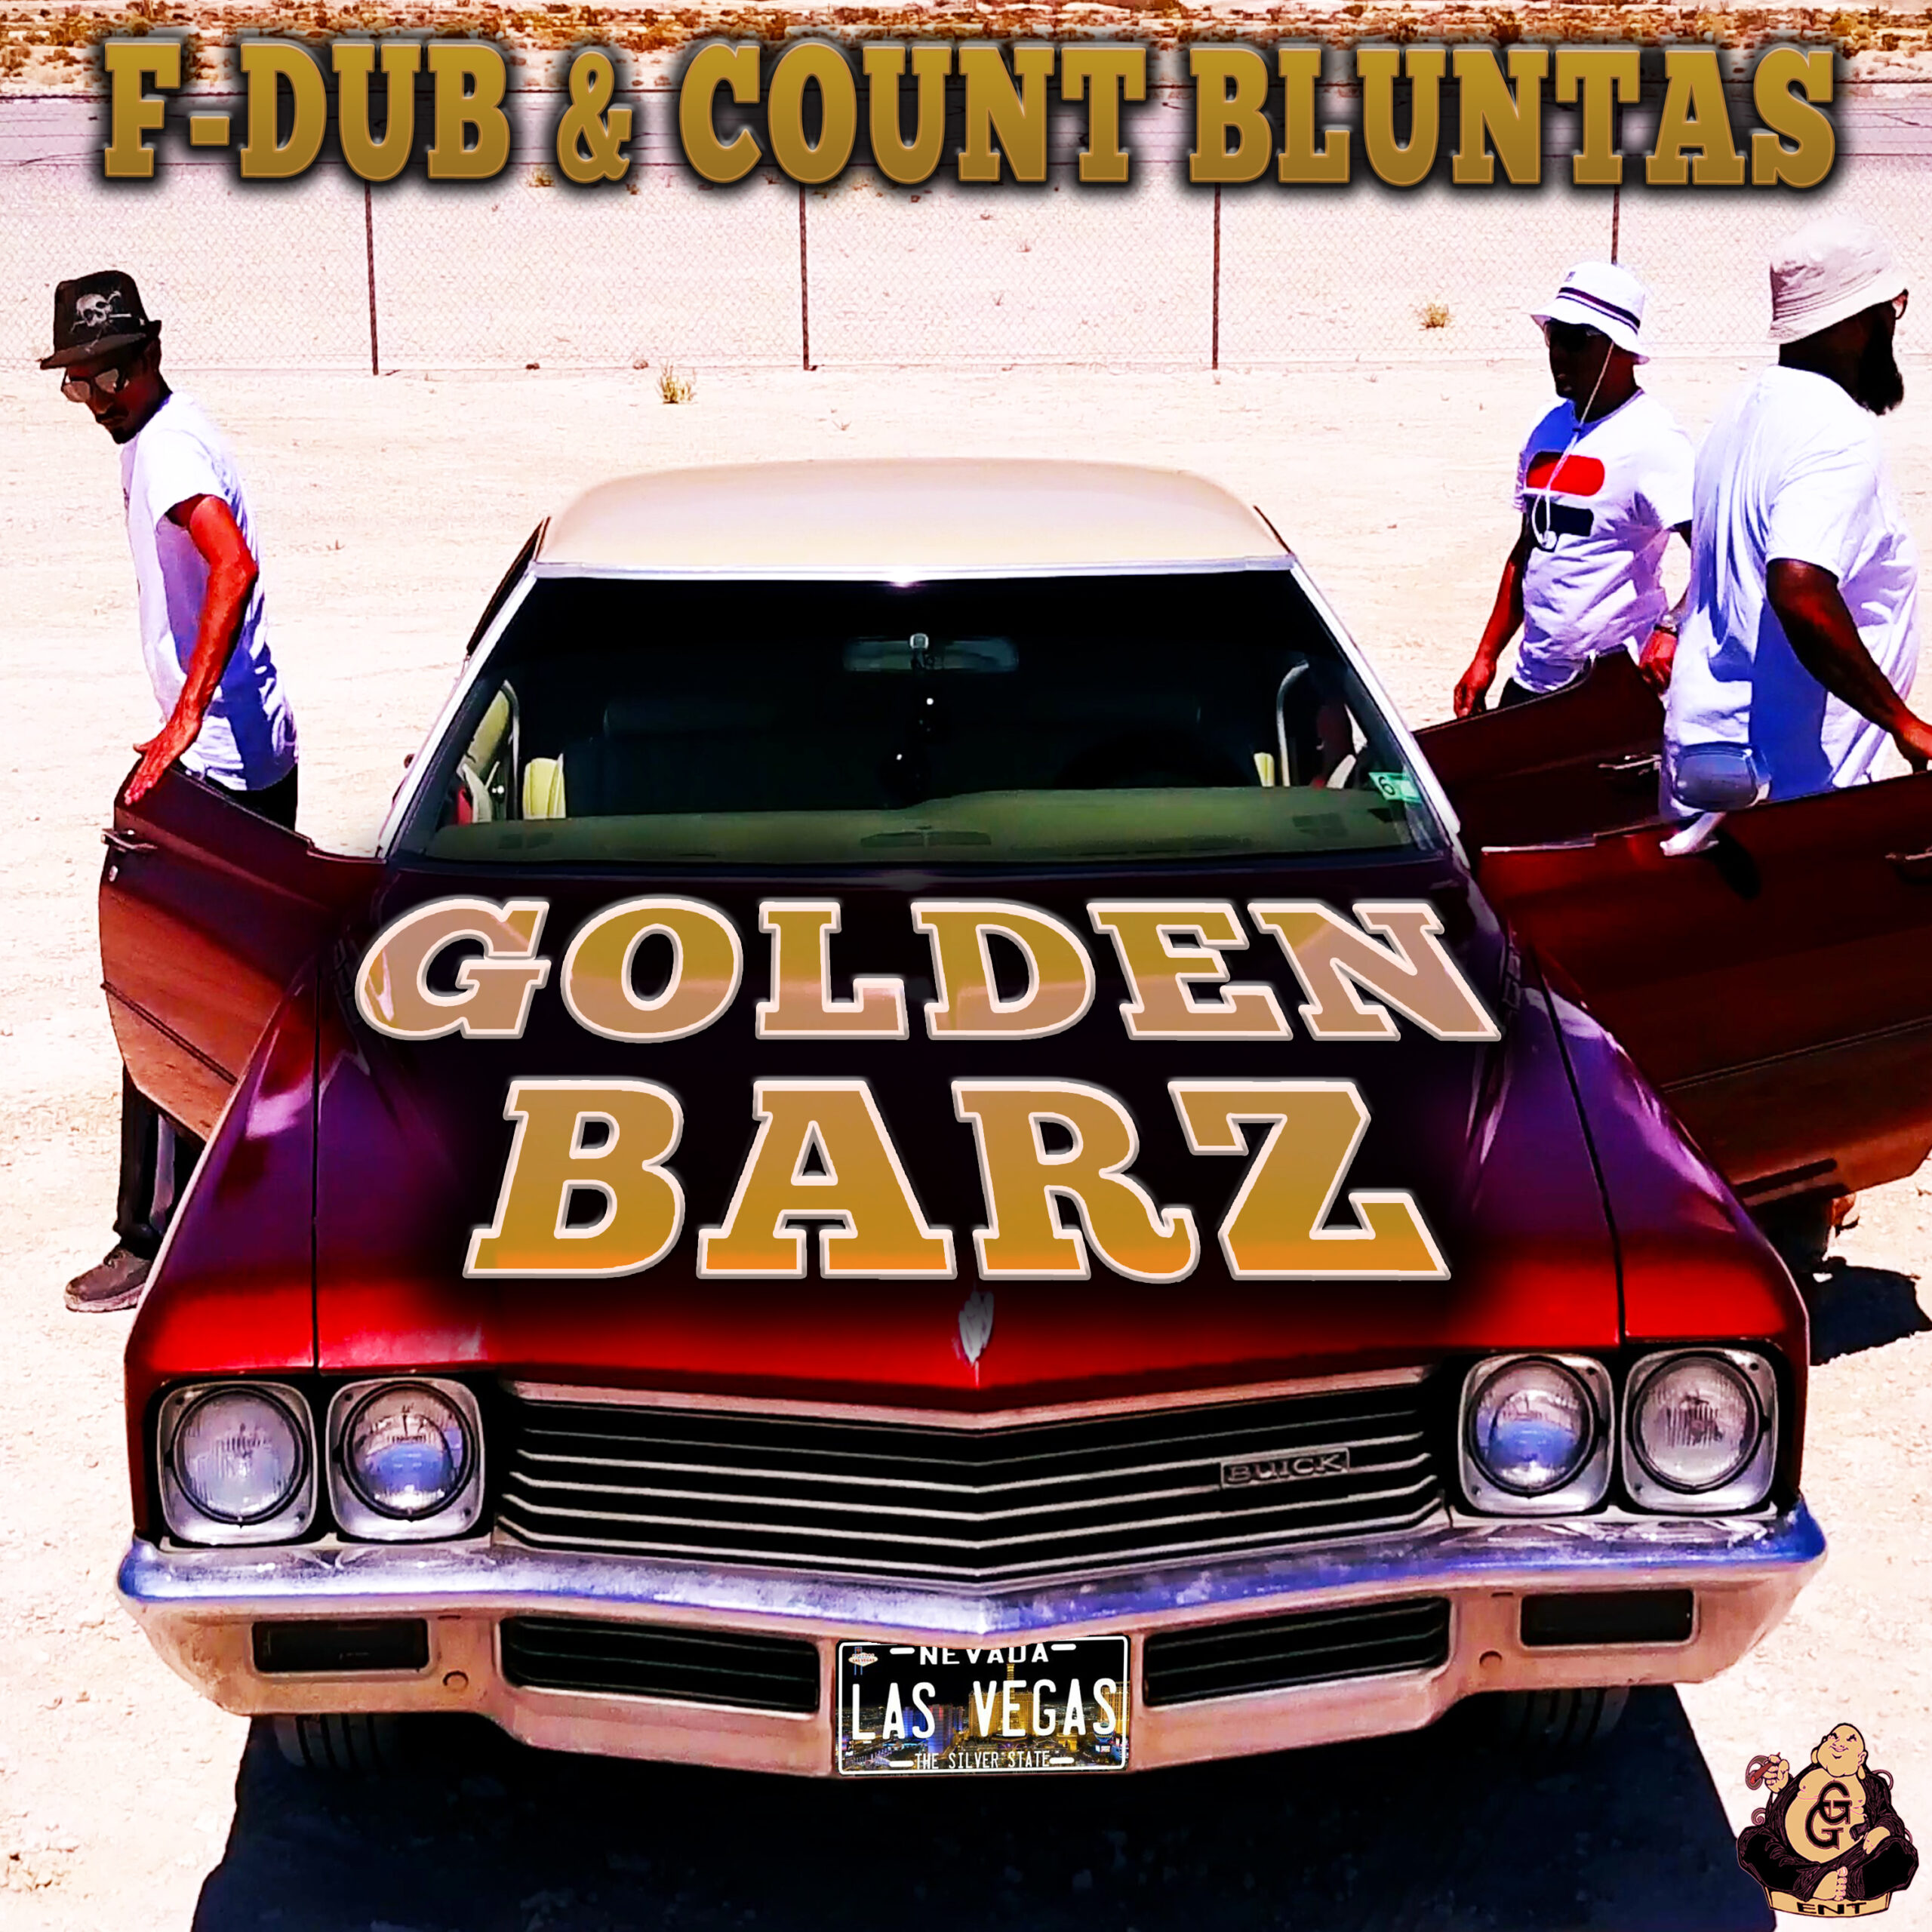 Read more about the article “Golden Barz” – F-DUB feat. Count Bluntas Official Music Video